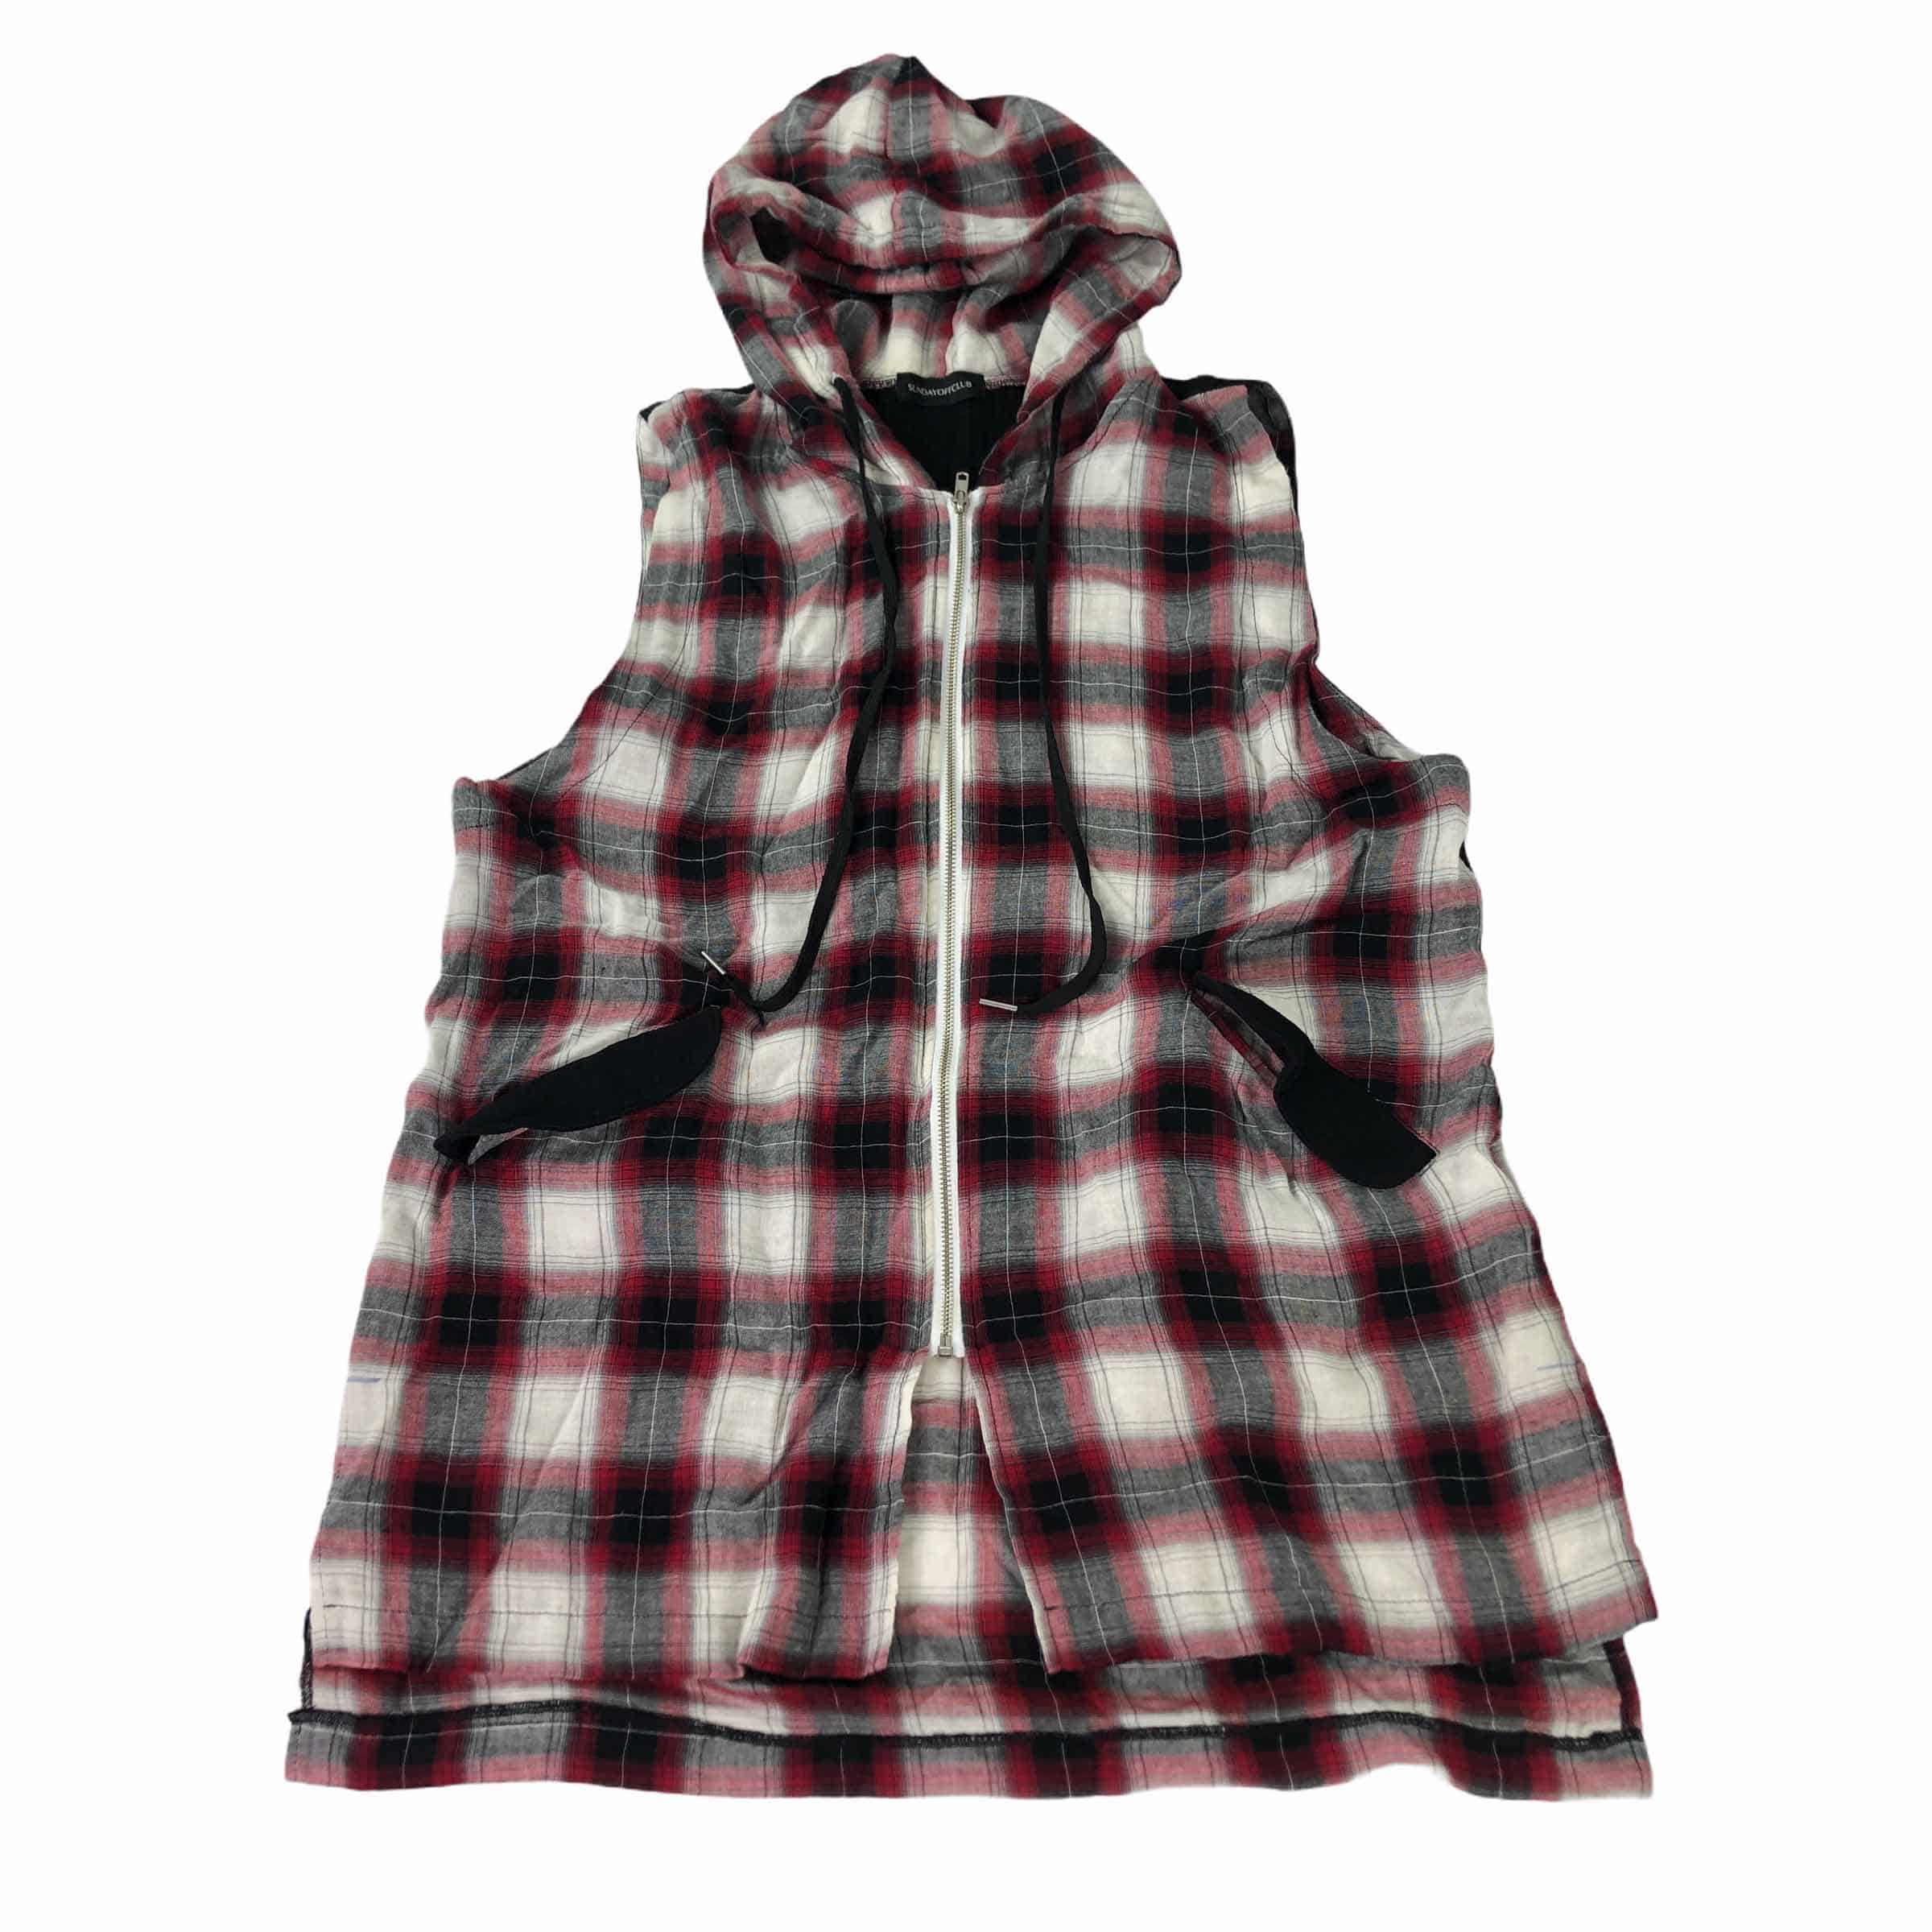 [Sunday Off Club] Bloodthirster Plaid Check hooded Shirt Red - Size Free